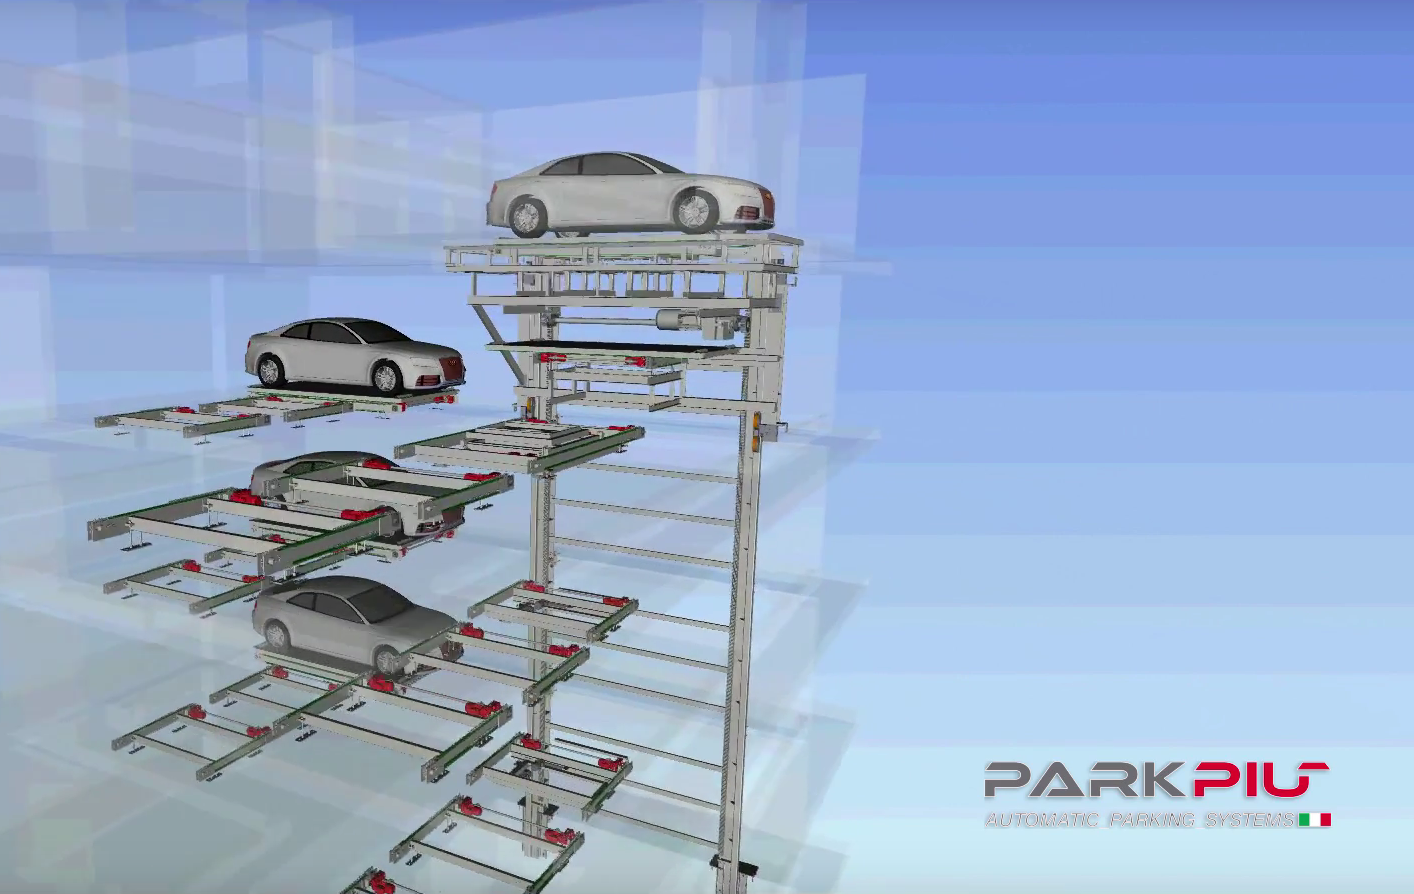 New installation automatic parking in Milan